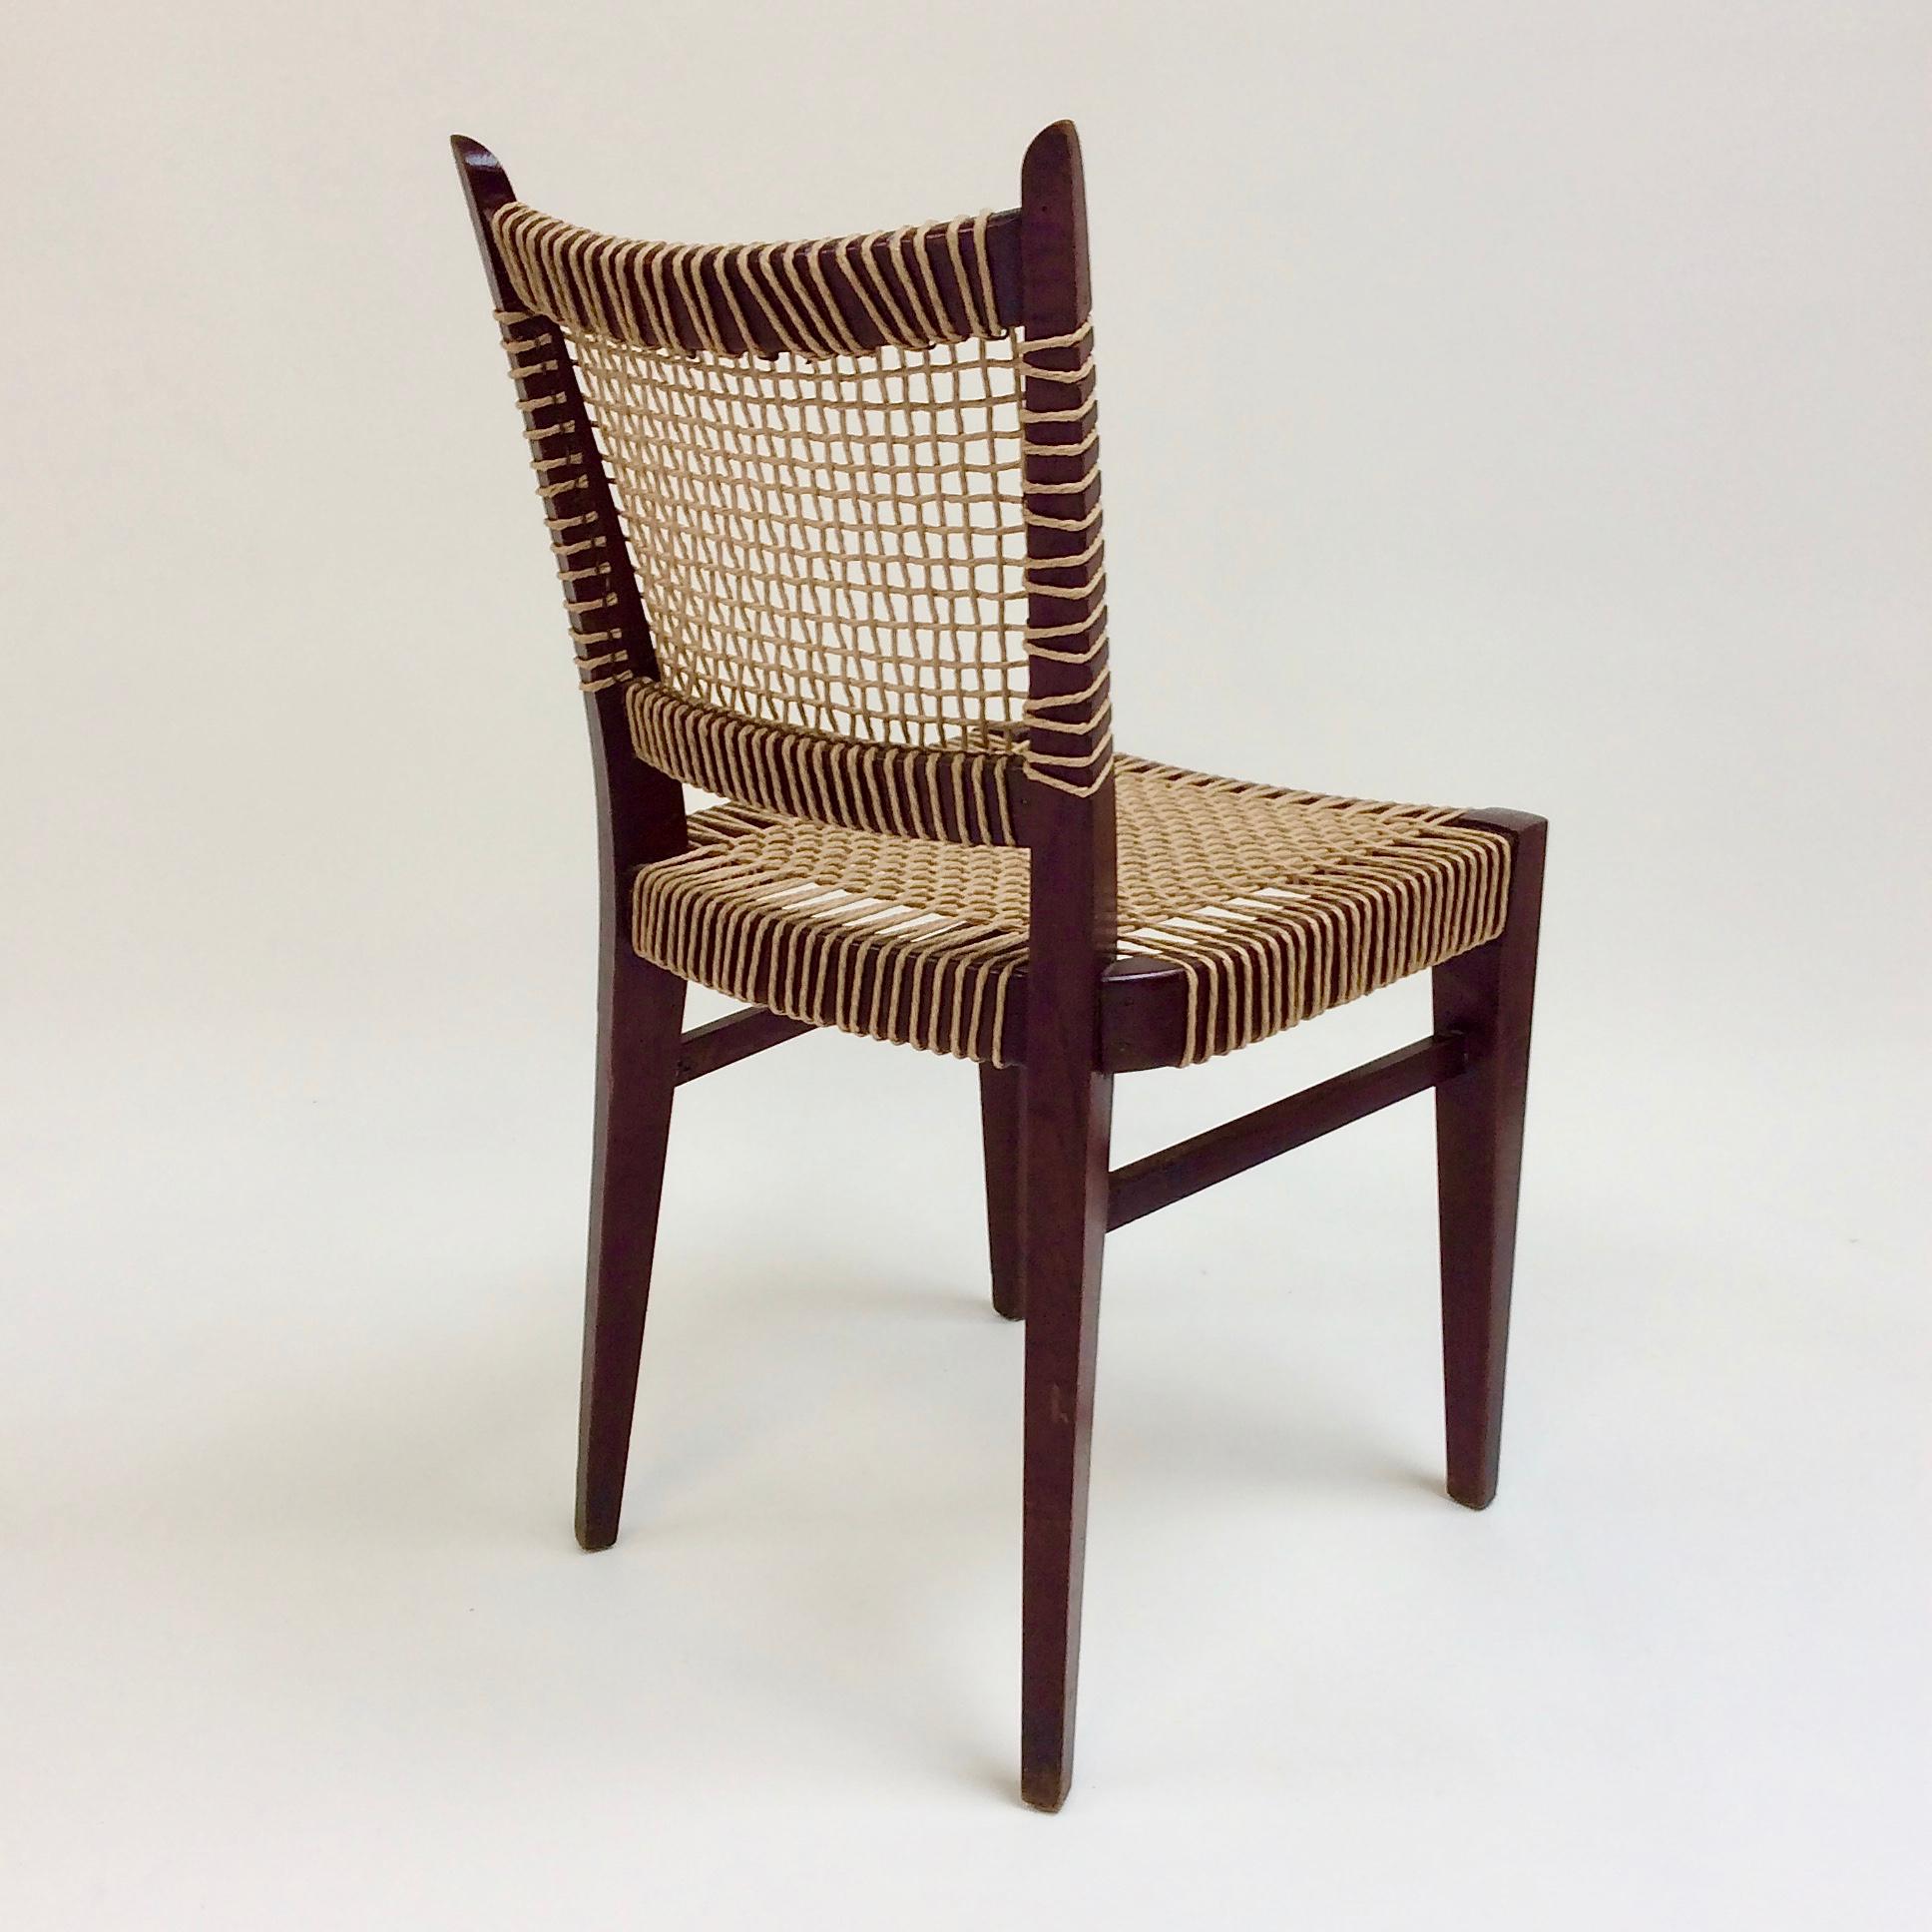 Pair of Midcentury Straw and Wood Chairs, circa 1950, France 1